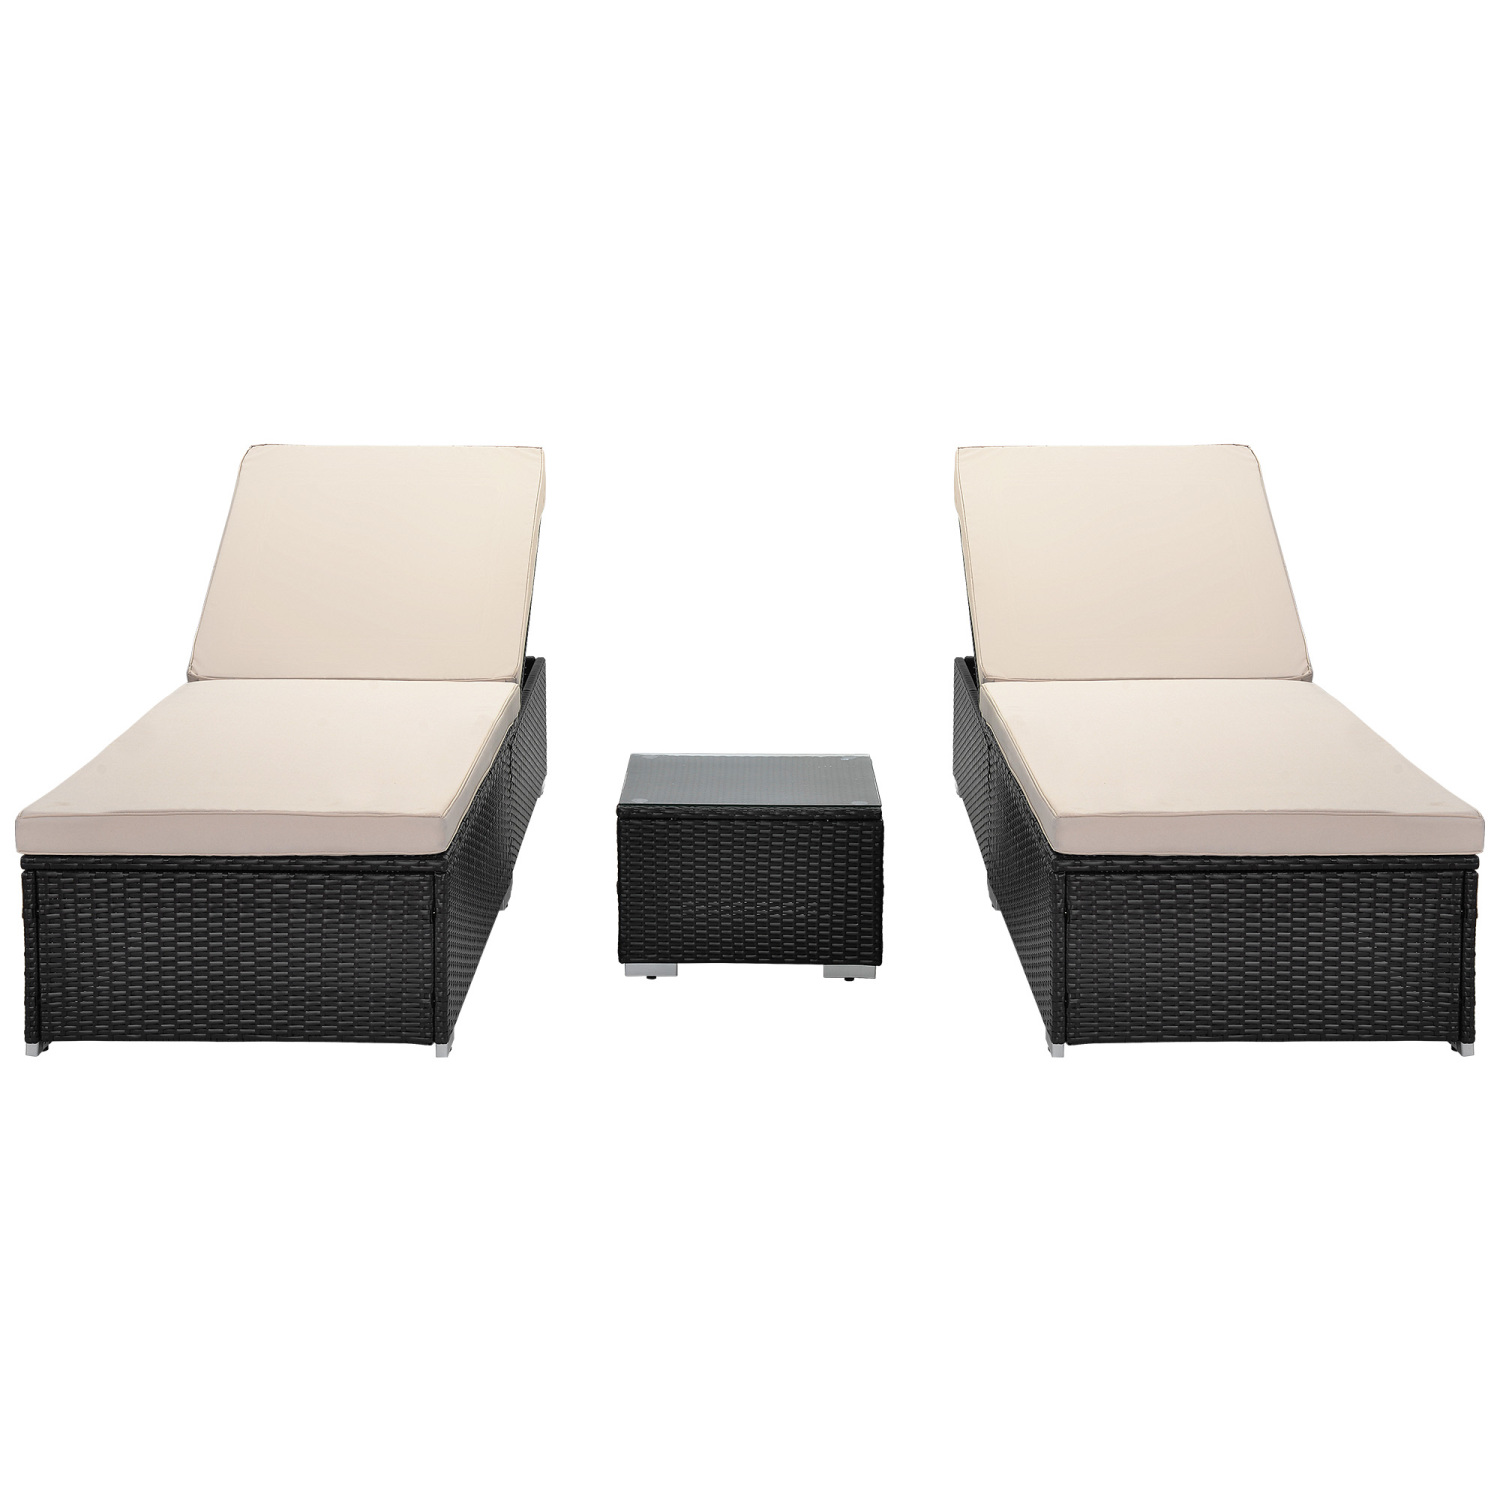 3 Piece Outdoor Garden Wicker Patio Chaise Lounge Set Adjustable PE Rattan Reclining Chairs with Cushions and Side Table - image 4 of 6